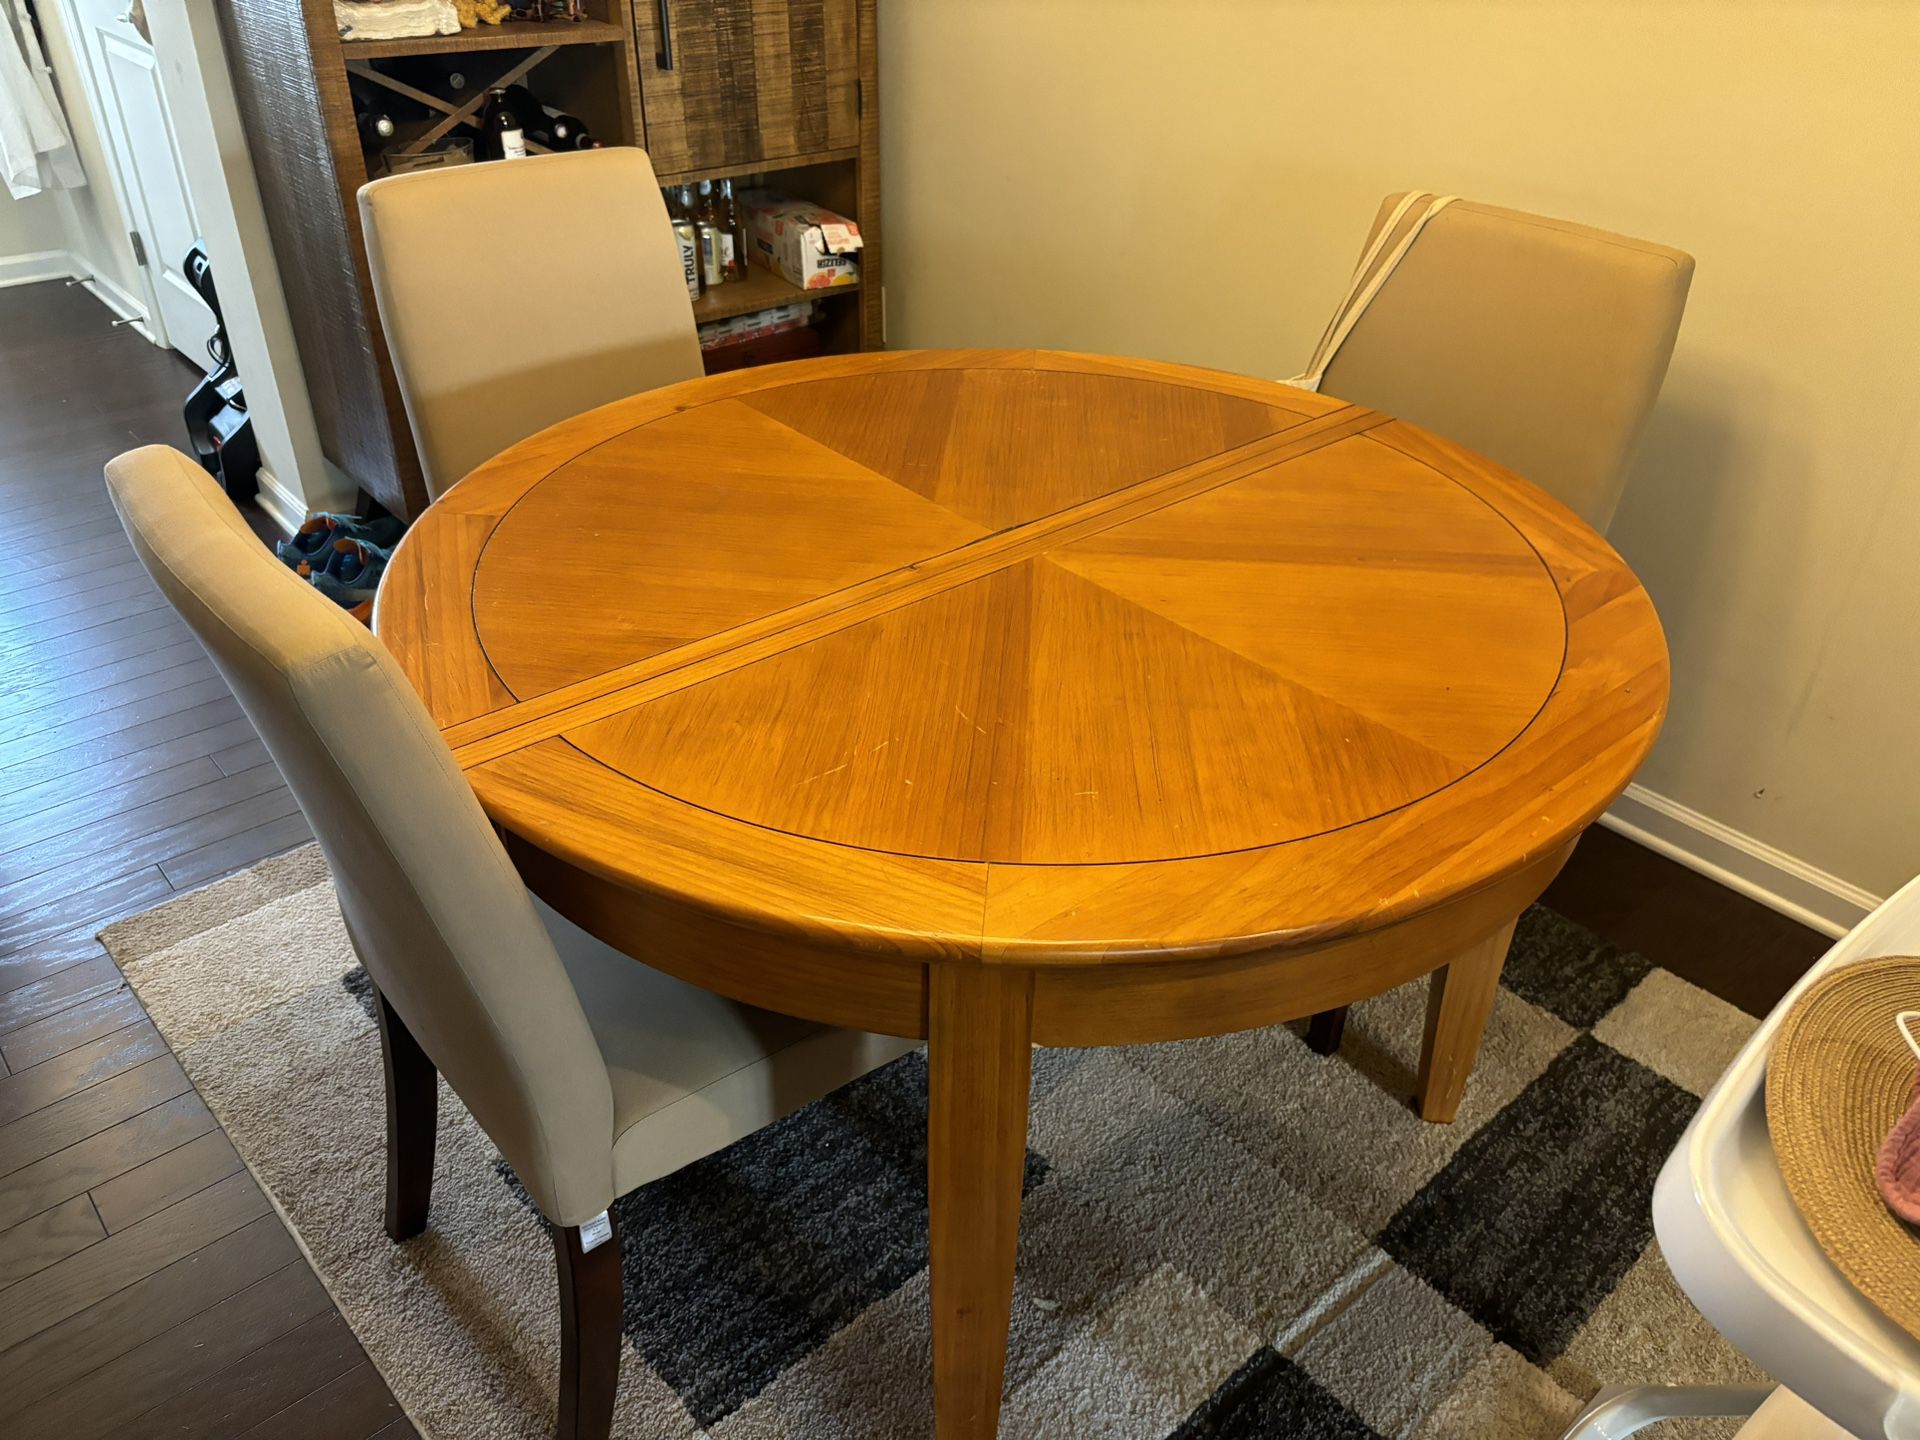 Wooden kitchen table, convertible circle to oval